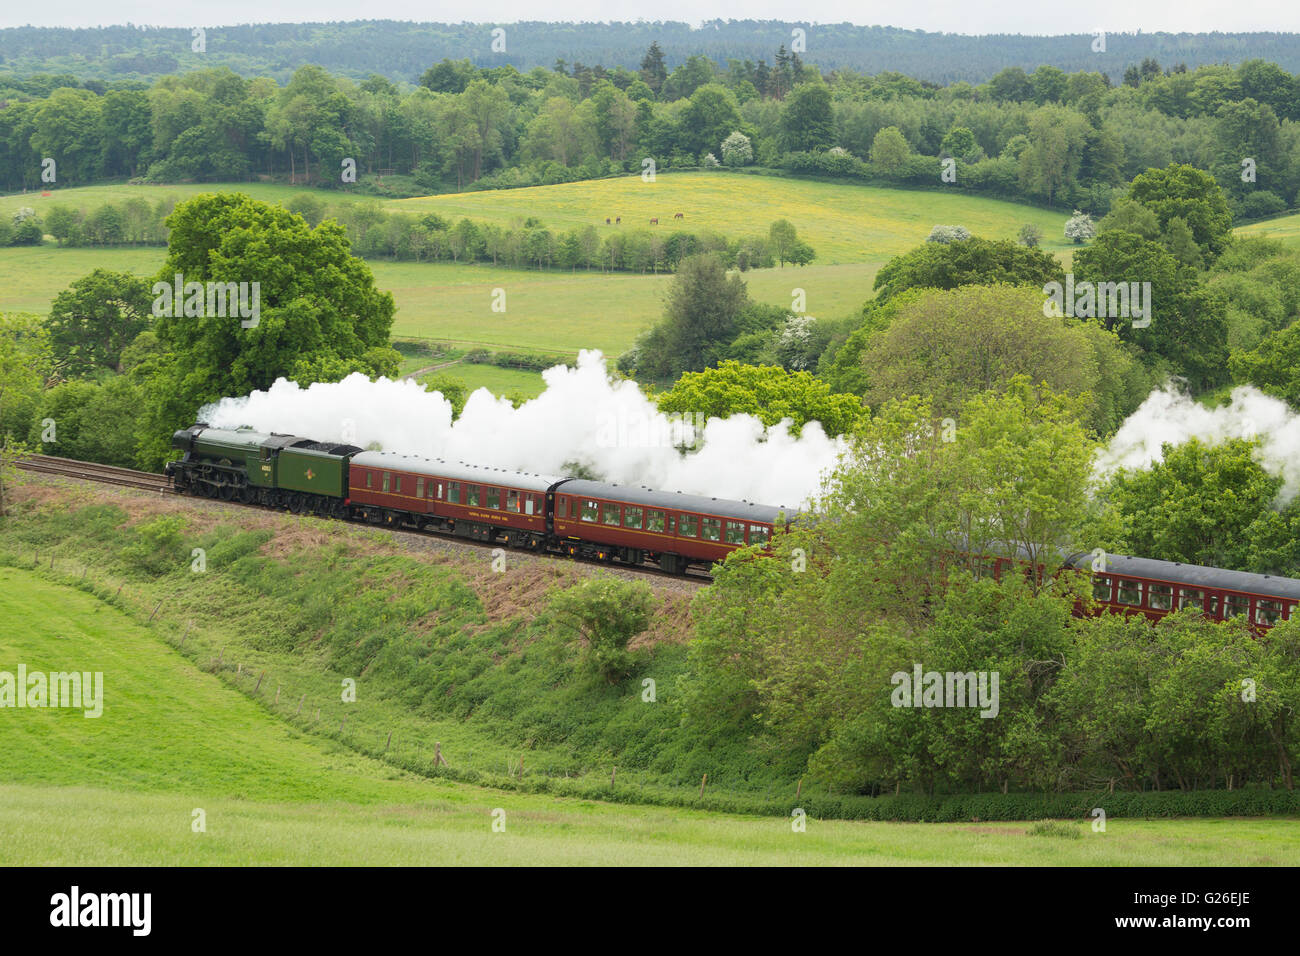 Surrey, UK. 25th May, 2016. The steam locomotive Flying Scotsman seen today on its first excursion in to the Surrey Hills since returning to service earlier this year. Rob Powell/Alamy Live News Stock Photo